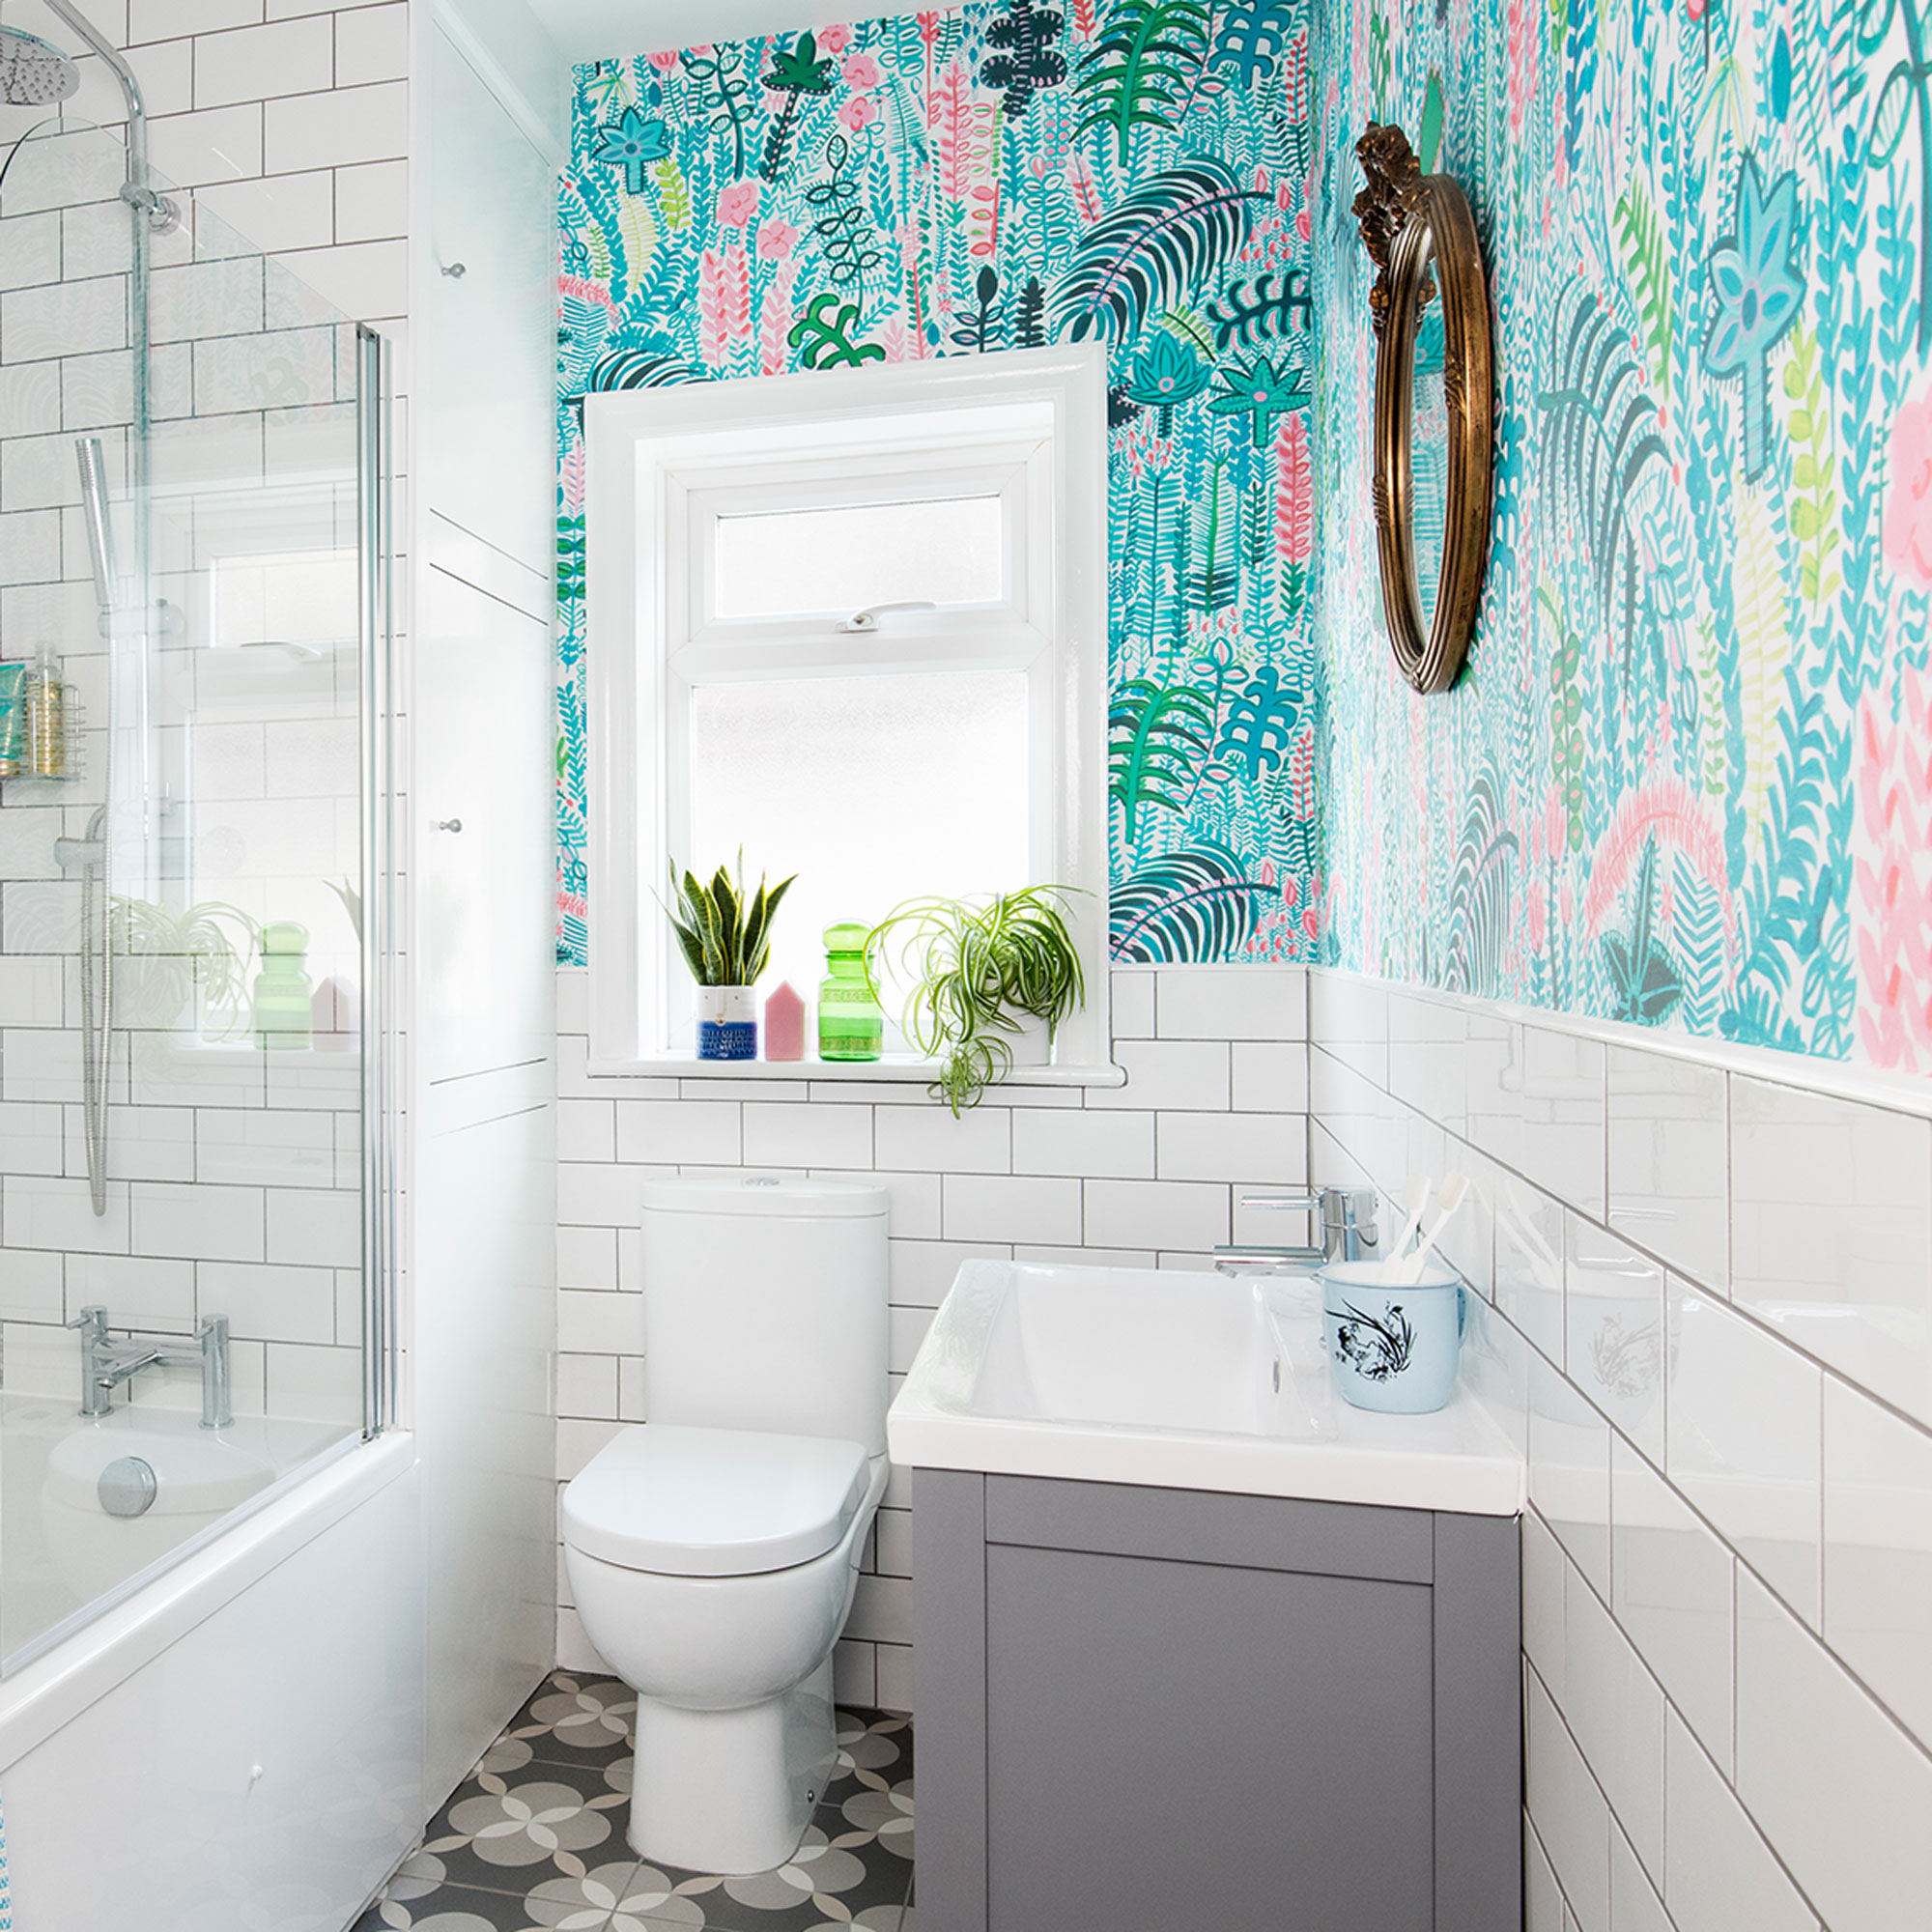 Wallpaper Bathroom Tips: Elevate Your Space with Stylish Patterns